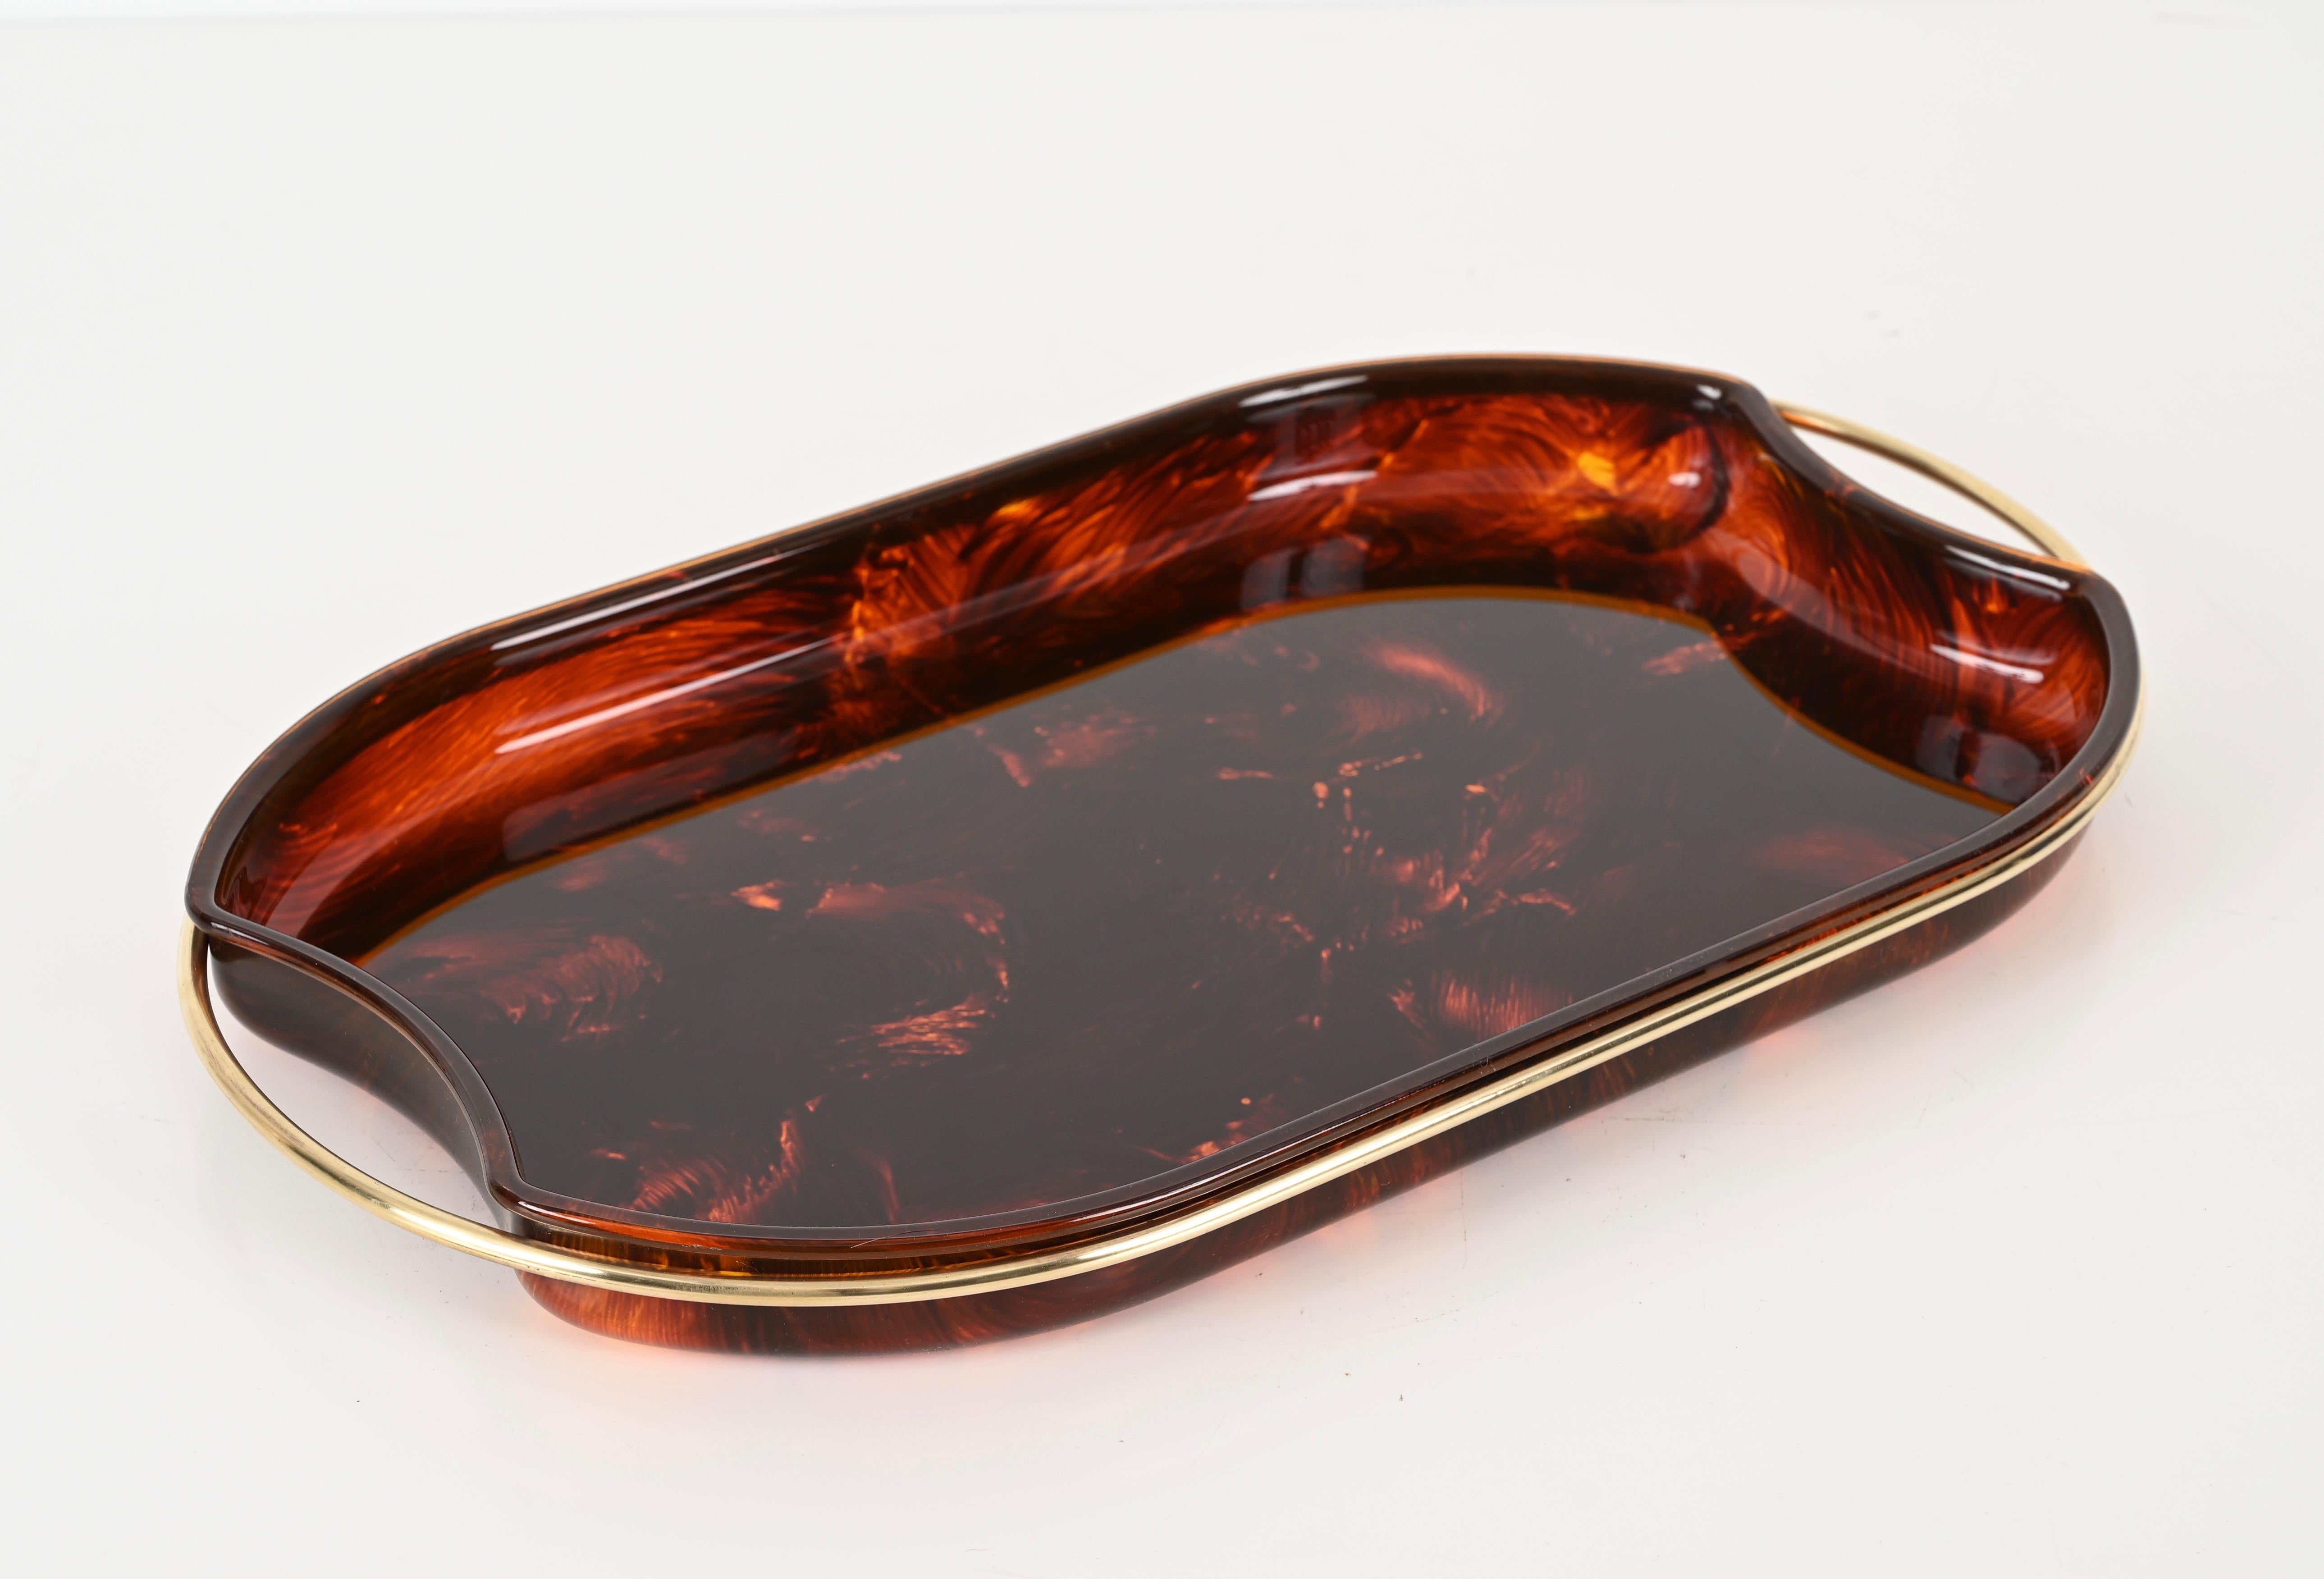 Midcentury Modern By Guzzini Italian Lucite and Brass Oval Serving Tray, 1970s For Sale 5